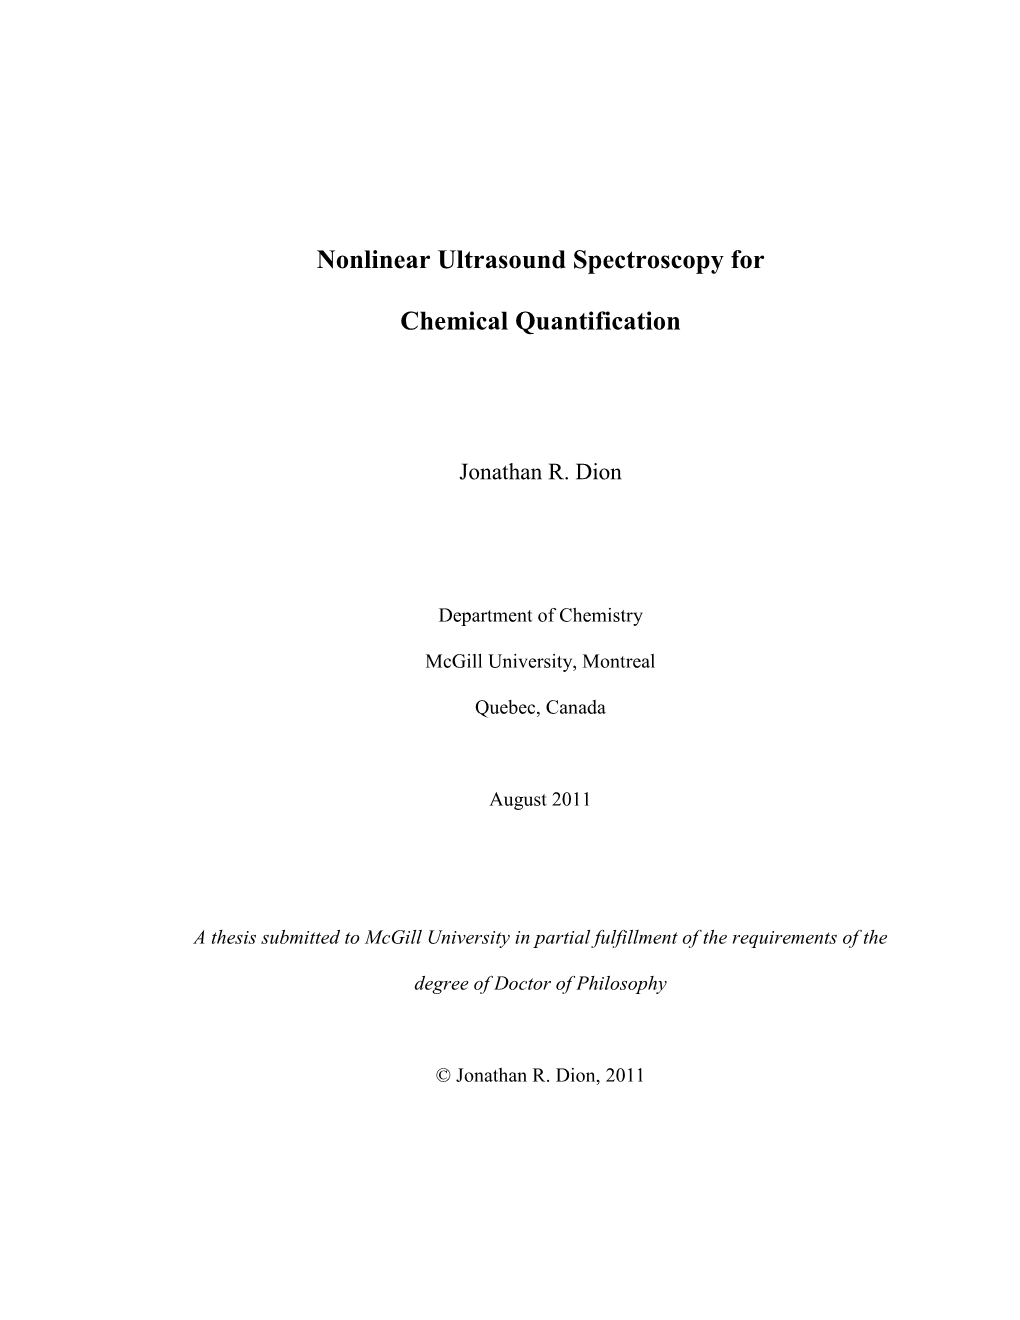 Nonlinear Ultrasound Spectroscopy for Chemical Quantification